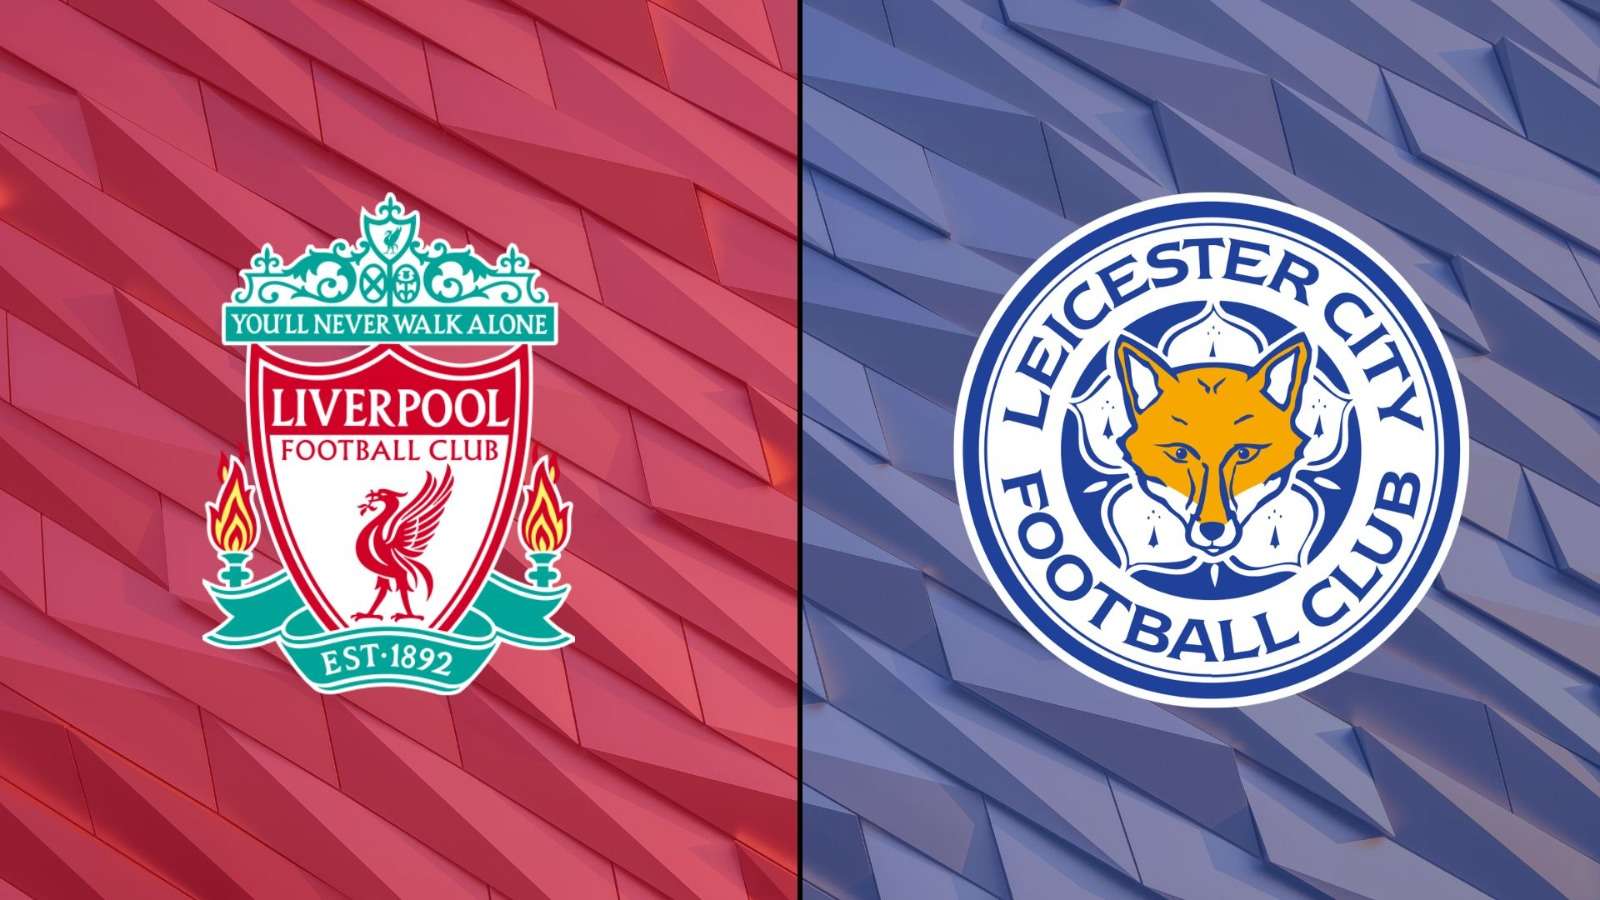 Liverpool vs Leicester